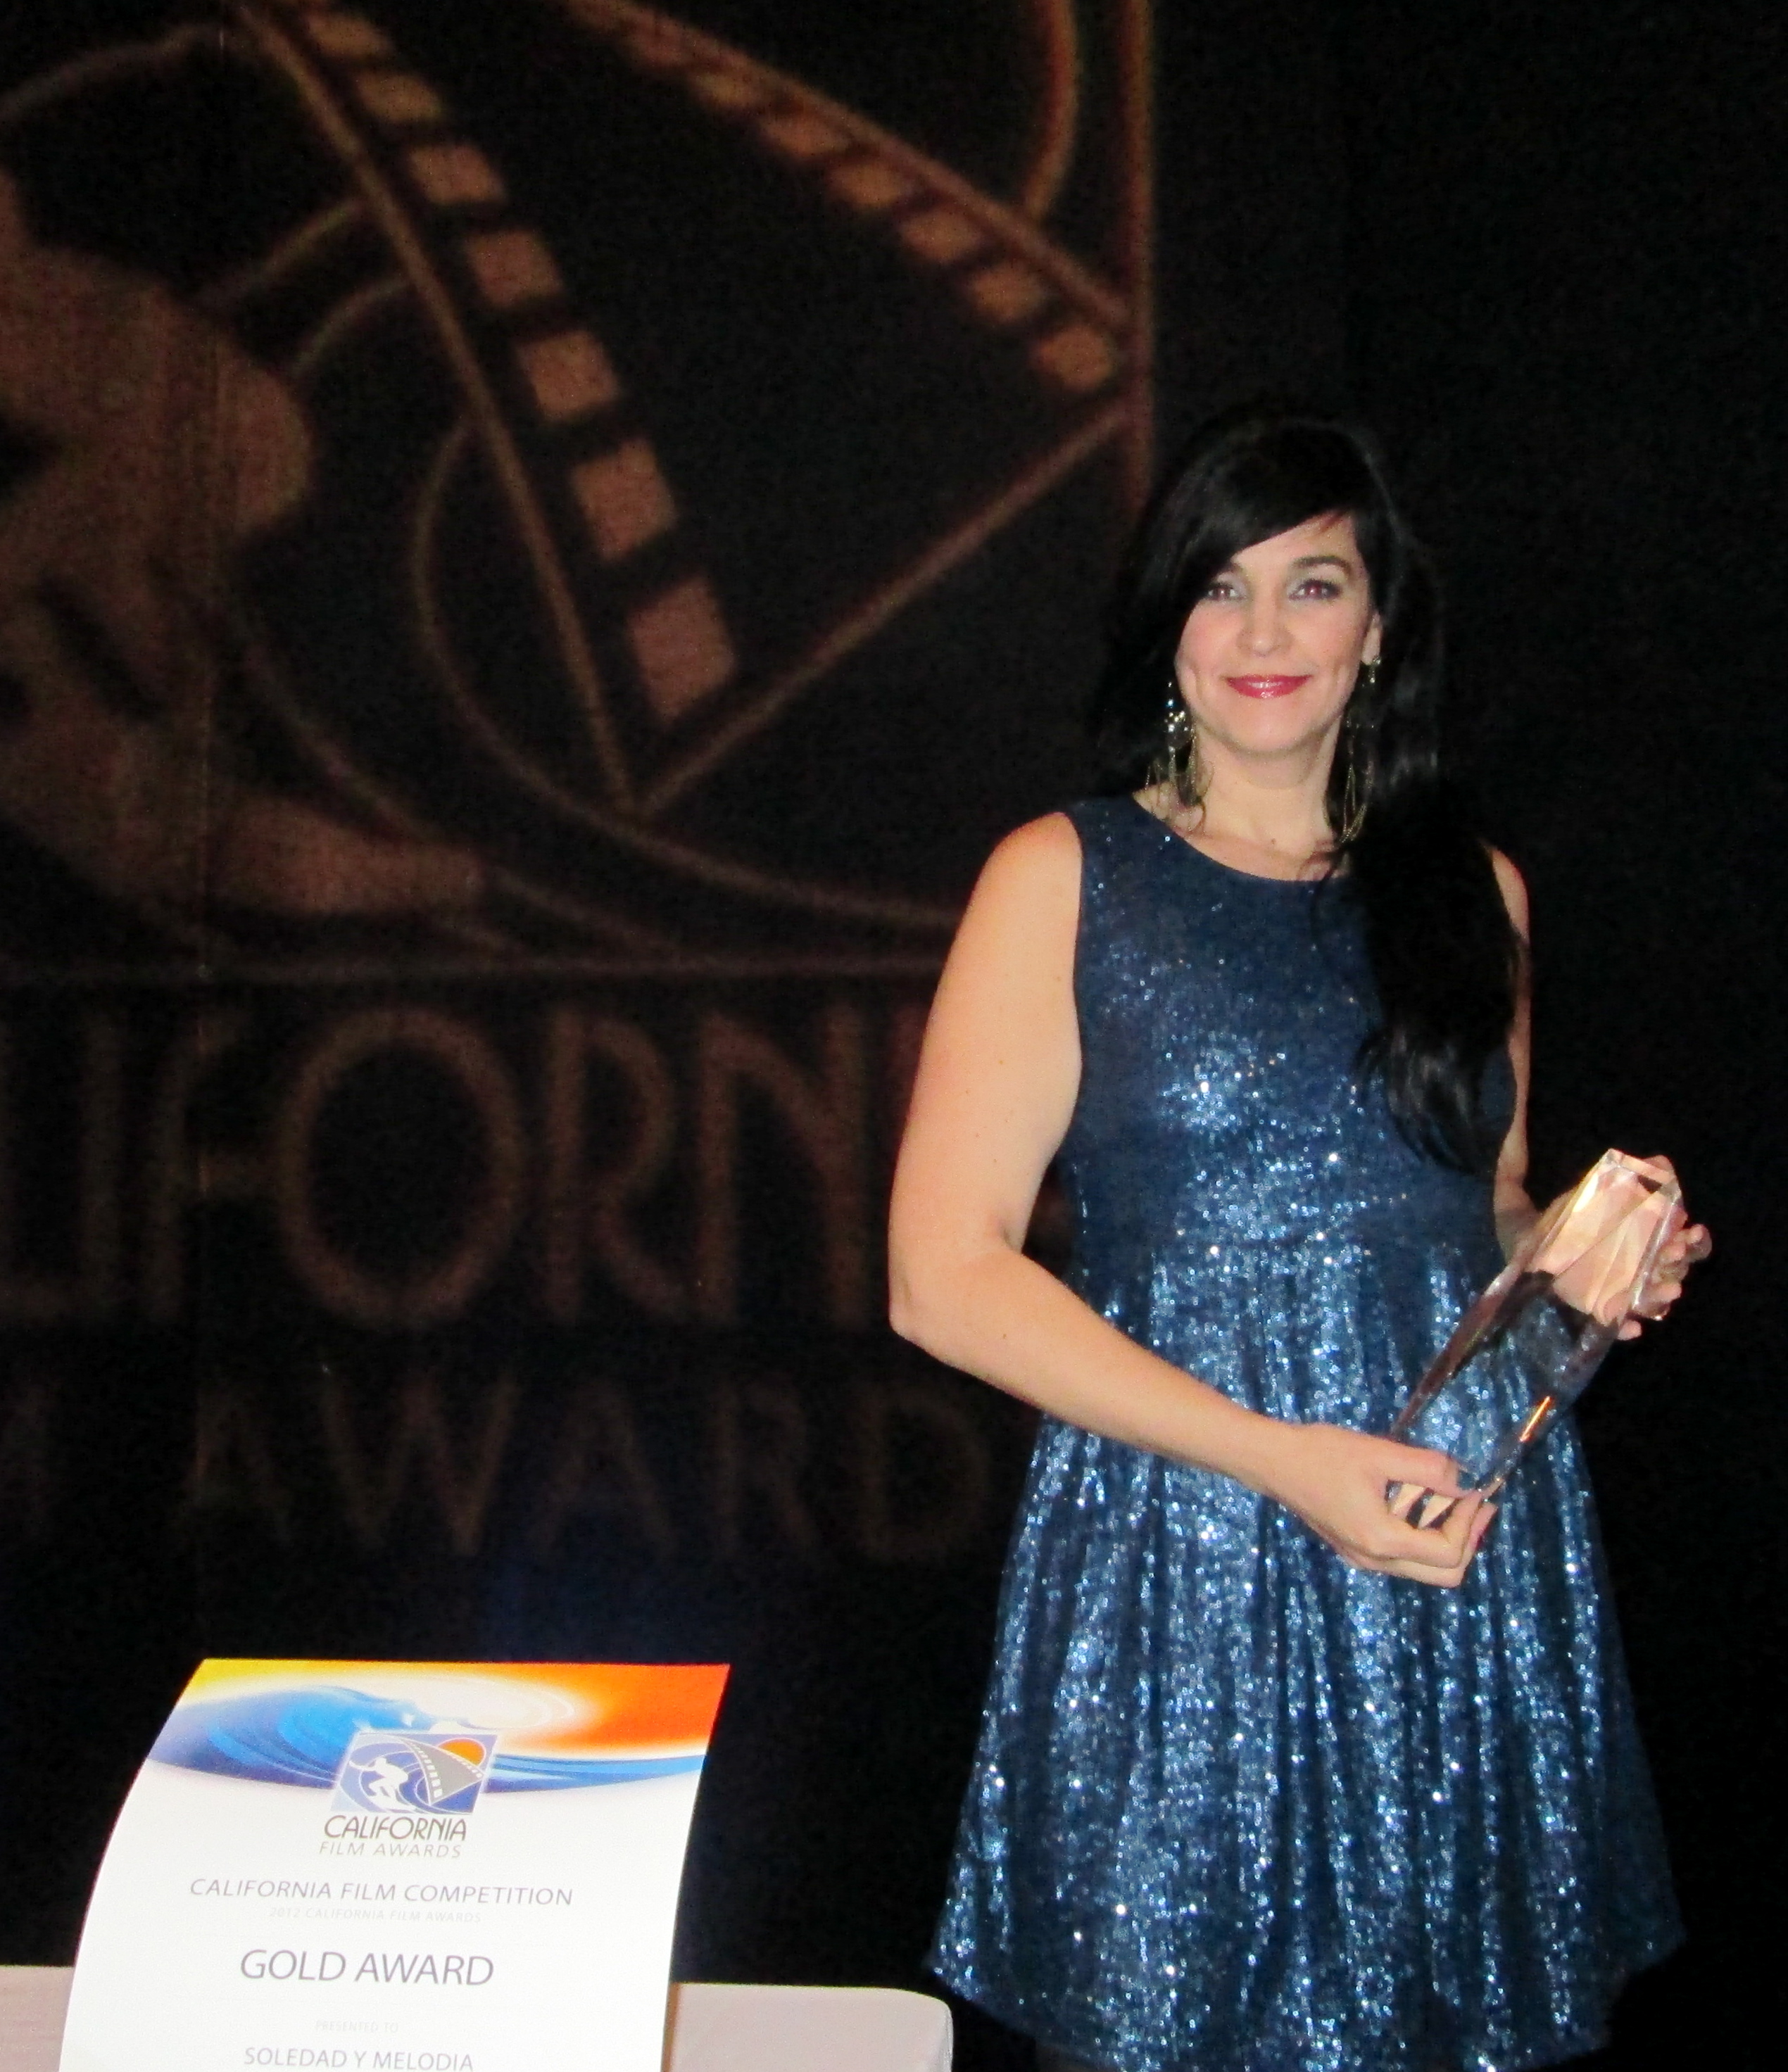 Lead actress, Ivone Reyes posing with the Gold award received for Best Short at The California Film Awards, January 26, 2013.